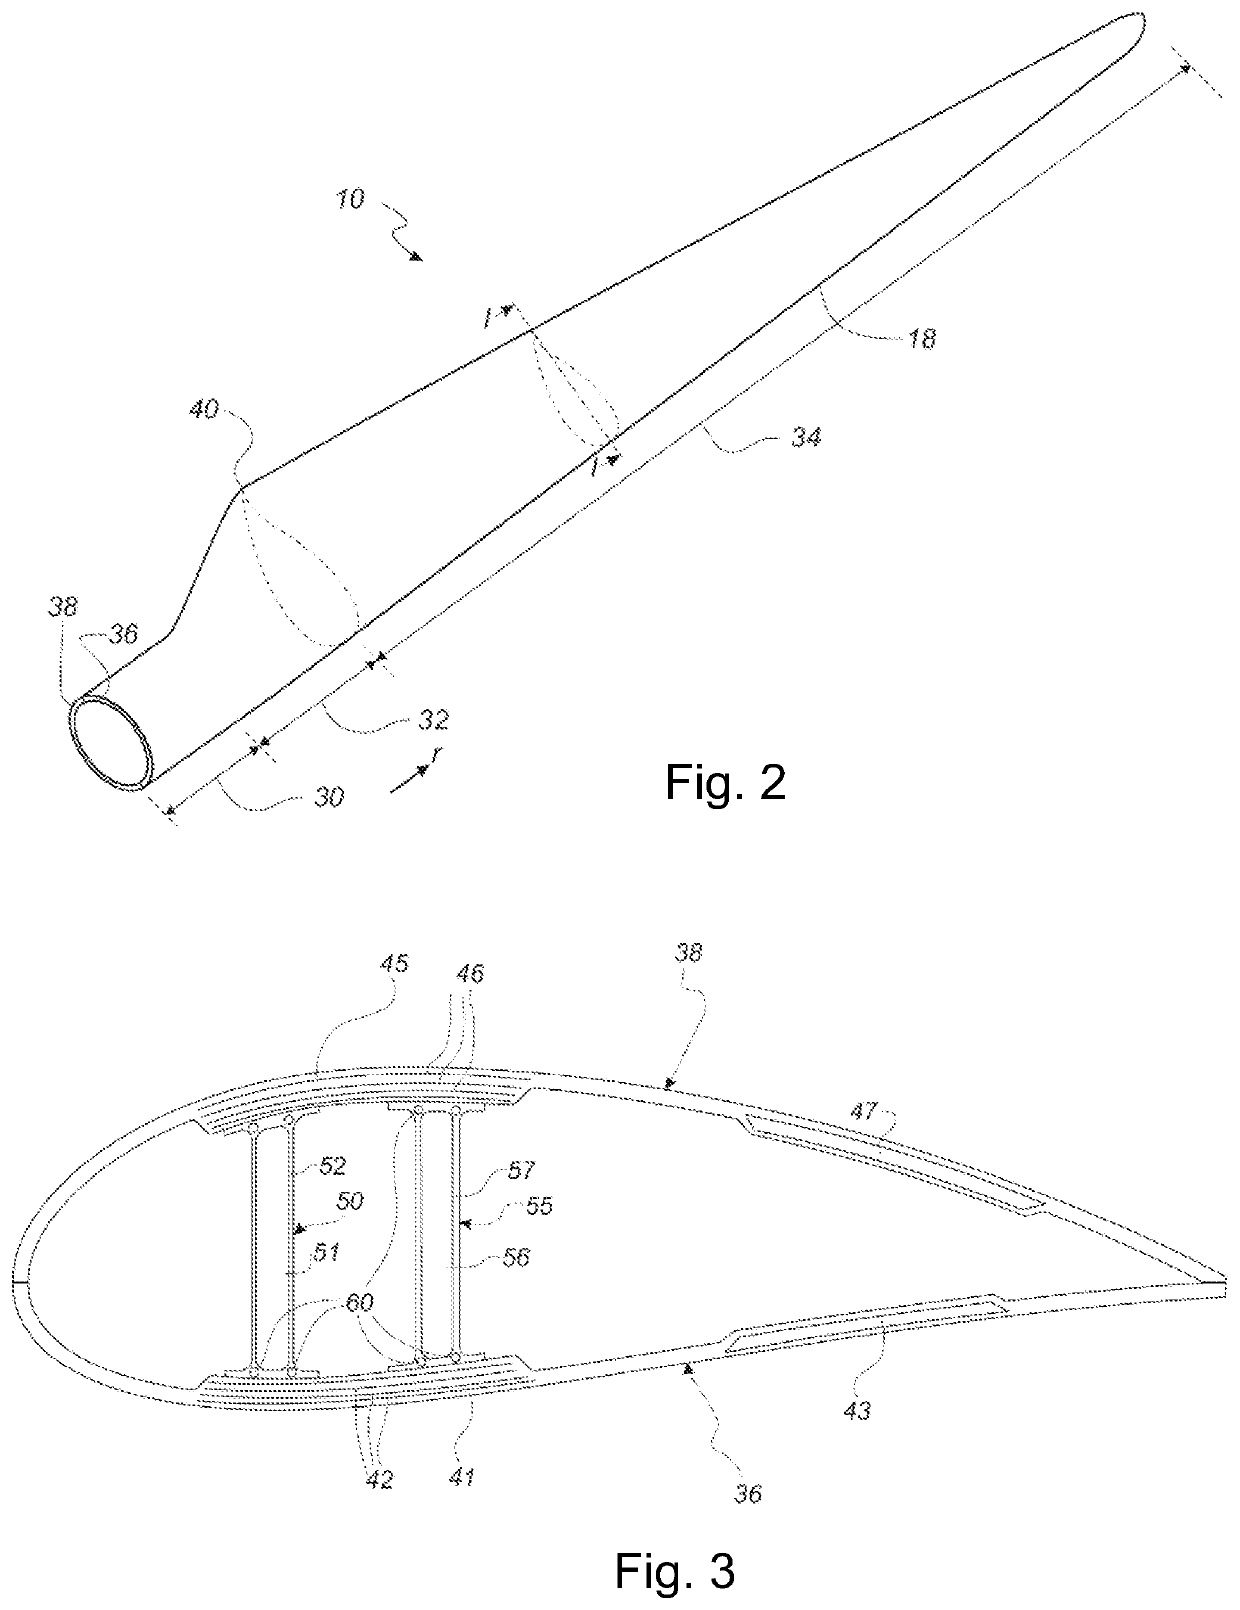 Method and system for manufacturing a shear web for a wind turbine